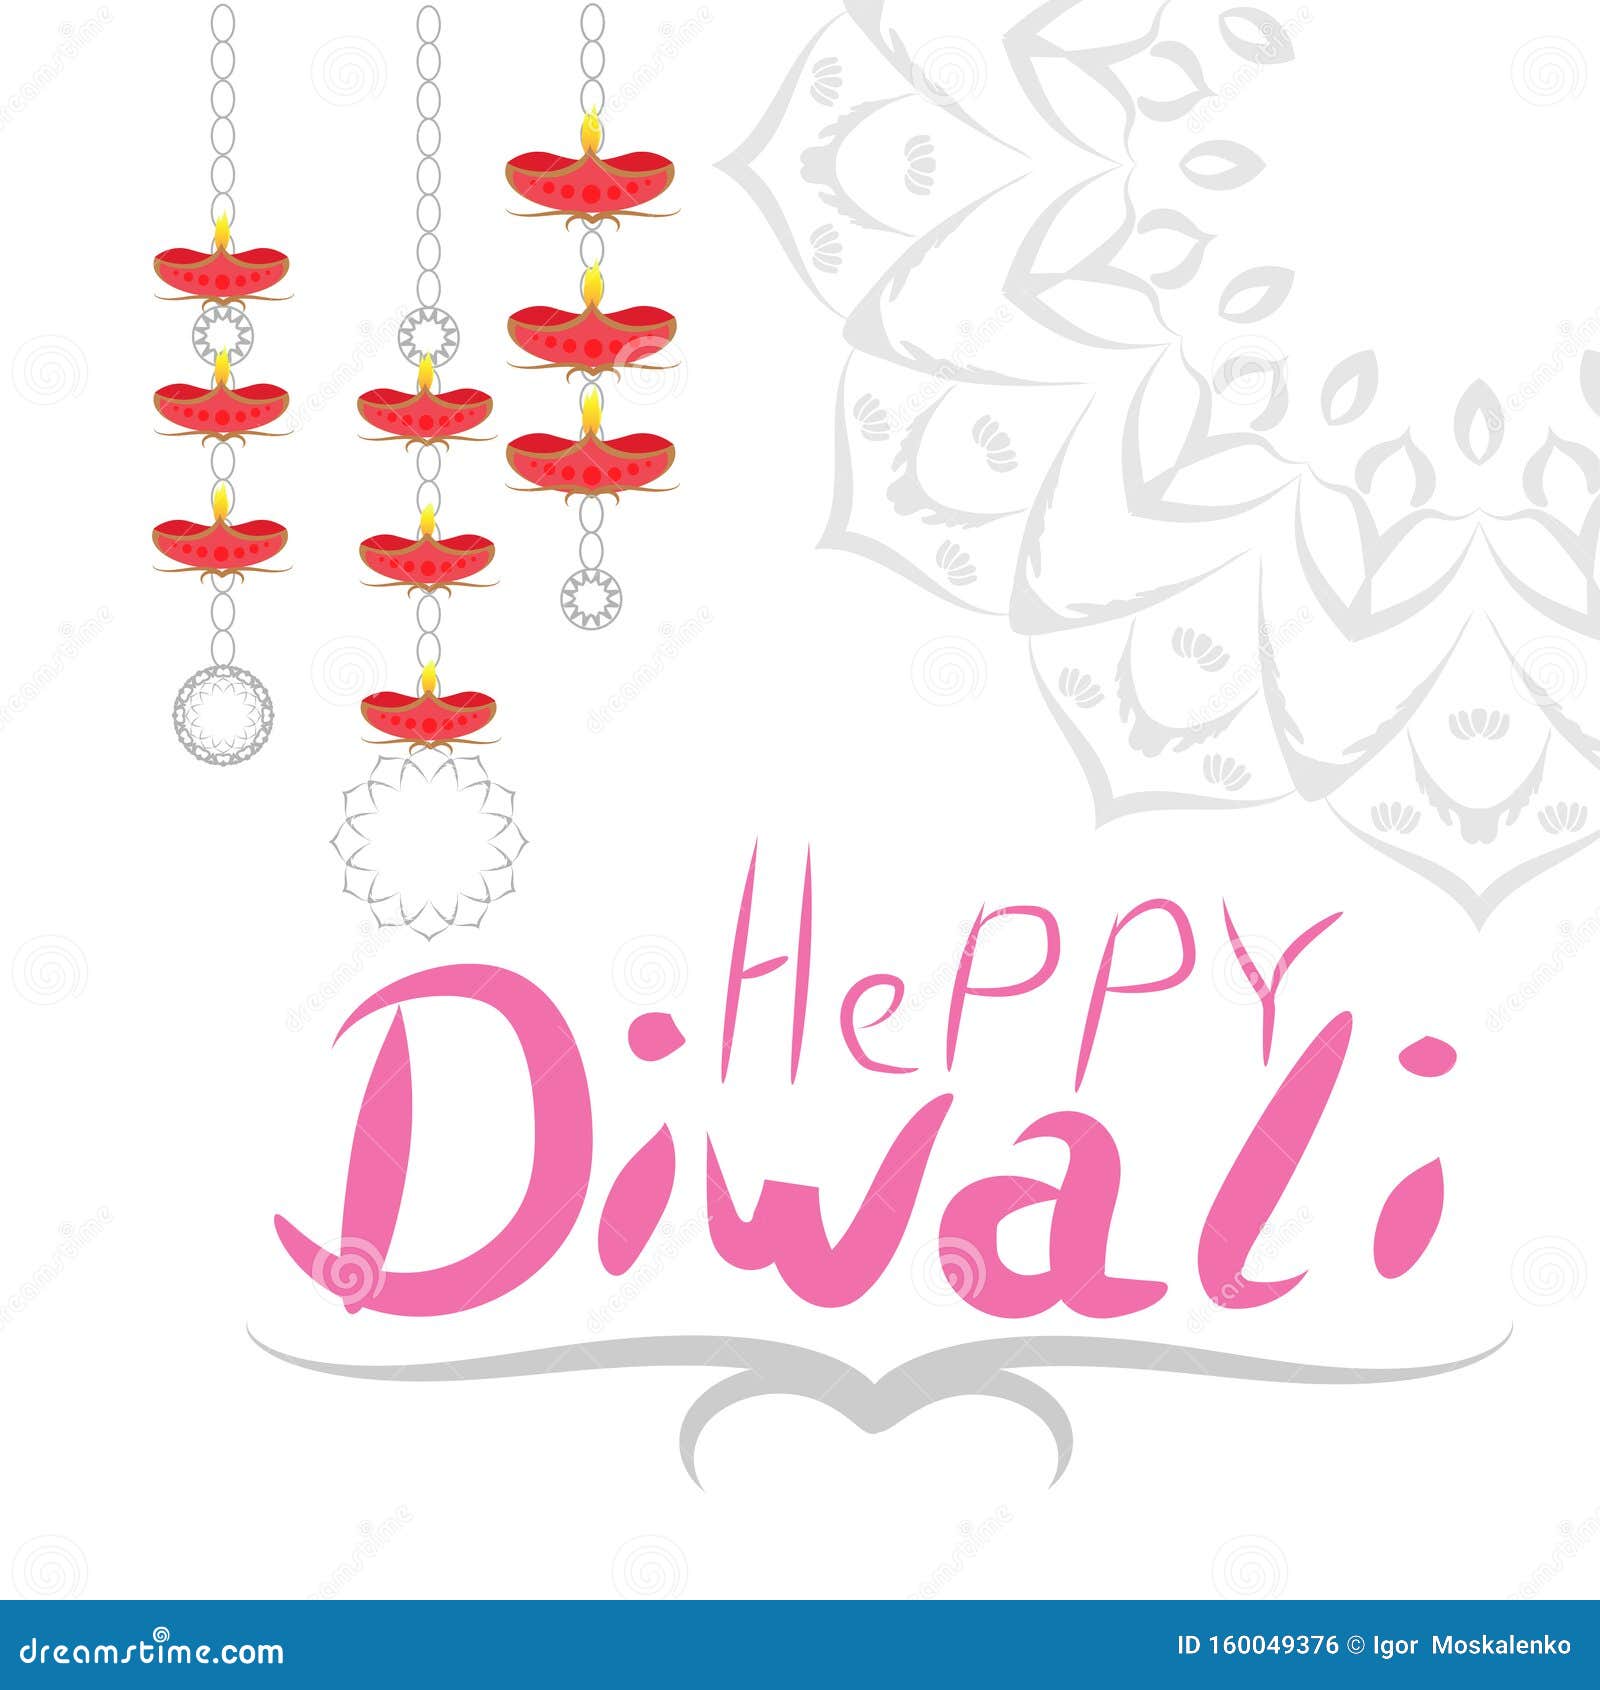 Diwali Special Offer Background Stock Vector ...